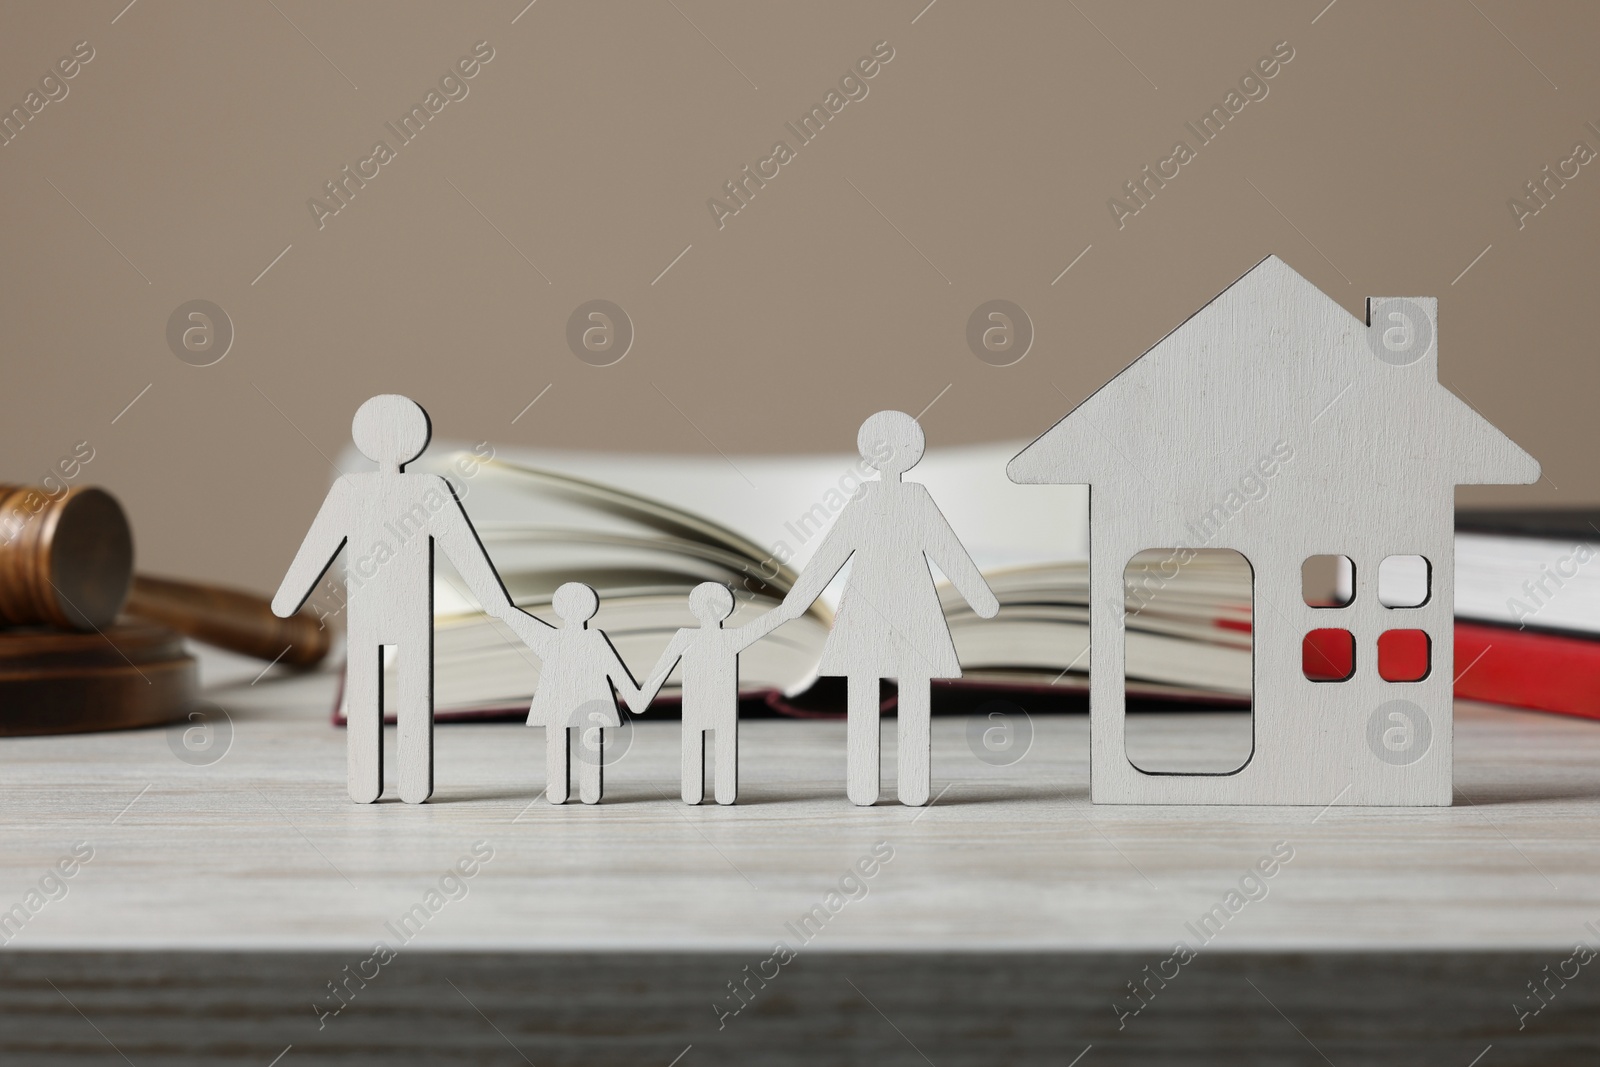 Photo of Family law. Figures of parents with children, house, books and gavel on wooden table